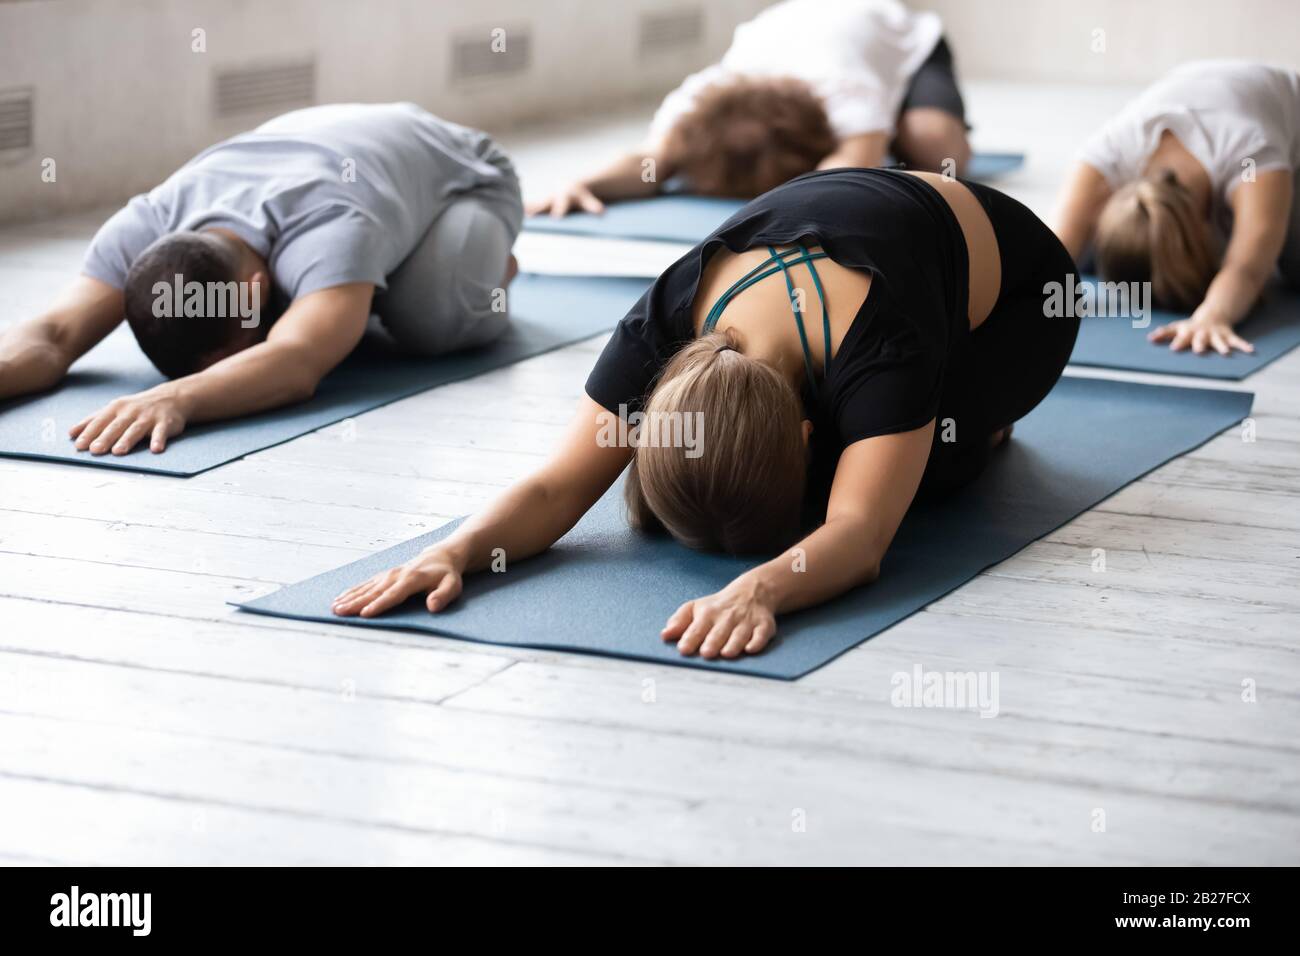 People in comfy activewear performing Balasana relaxation exercise during session Stock Photo